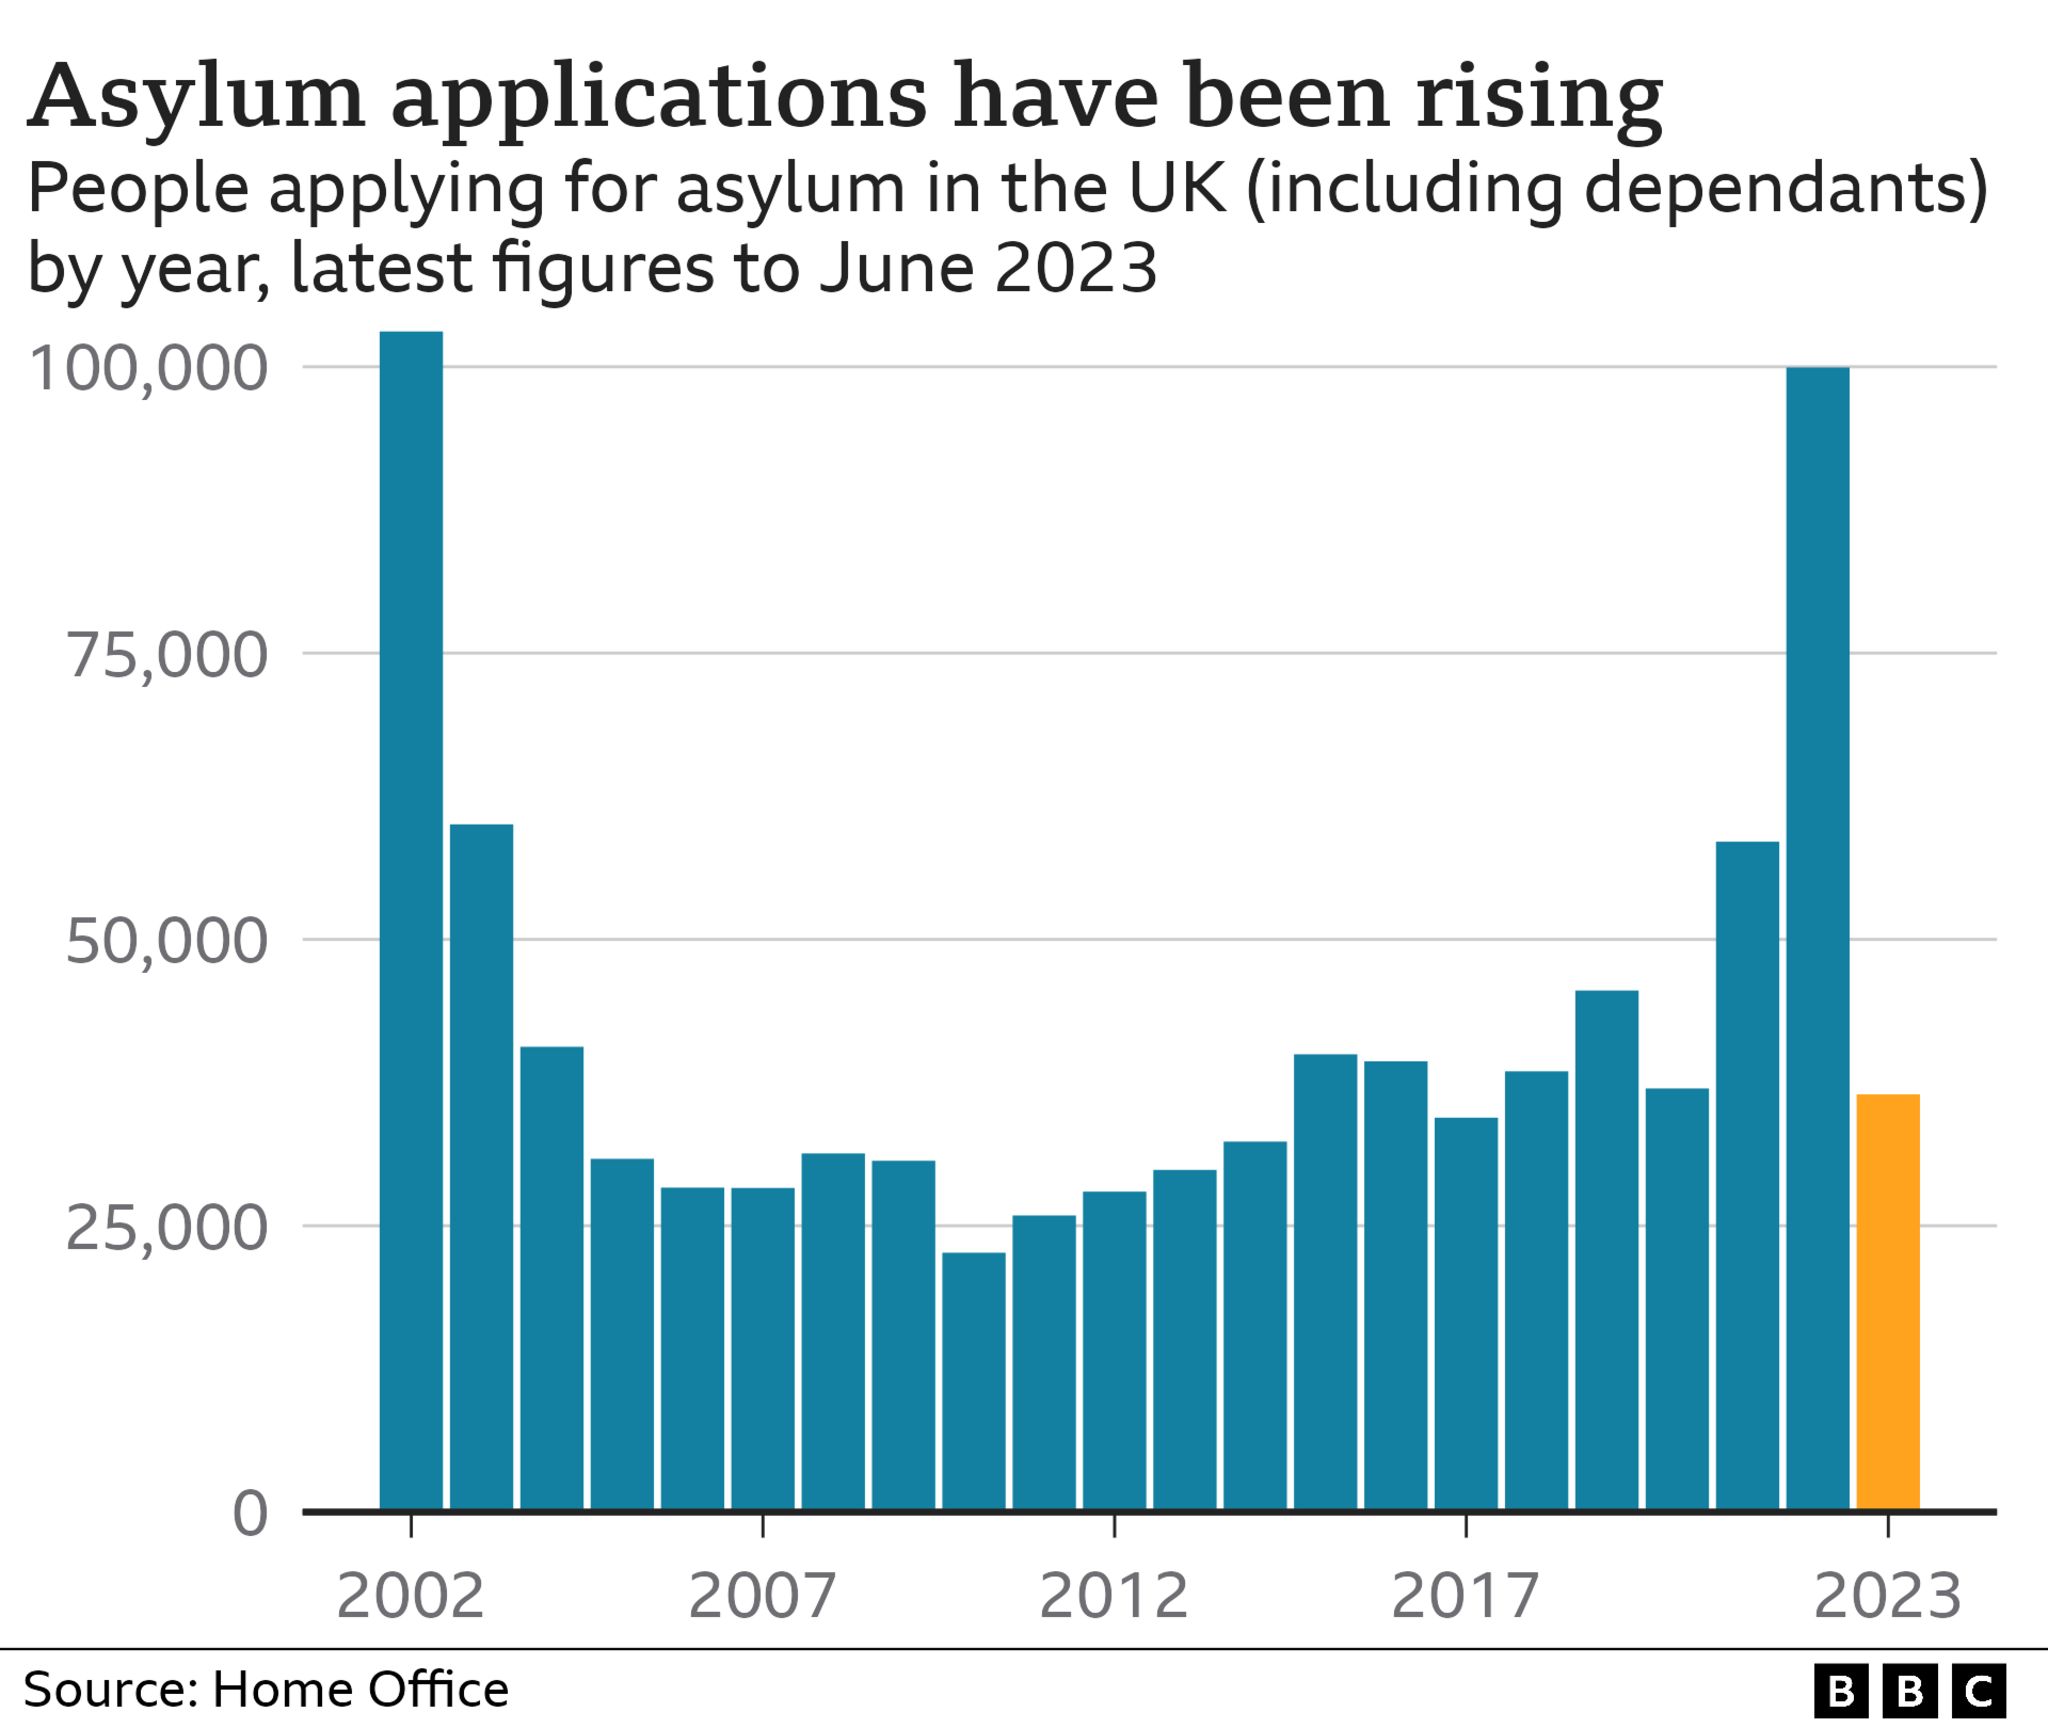 Chart showing the number of asylum applications to the UK since 2002